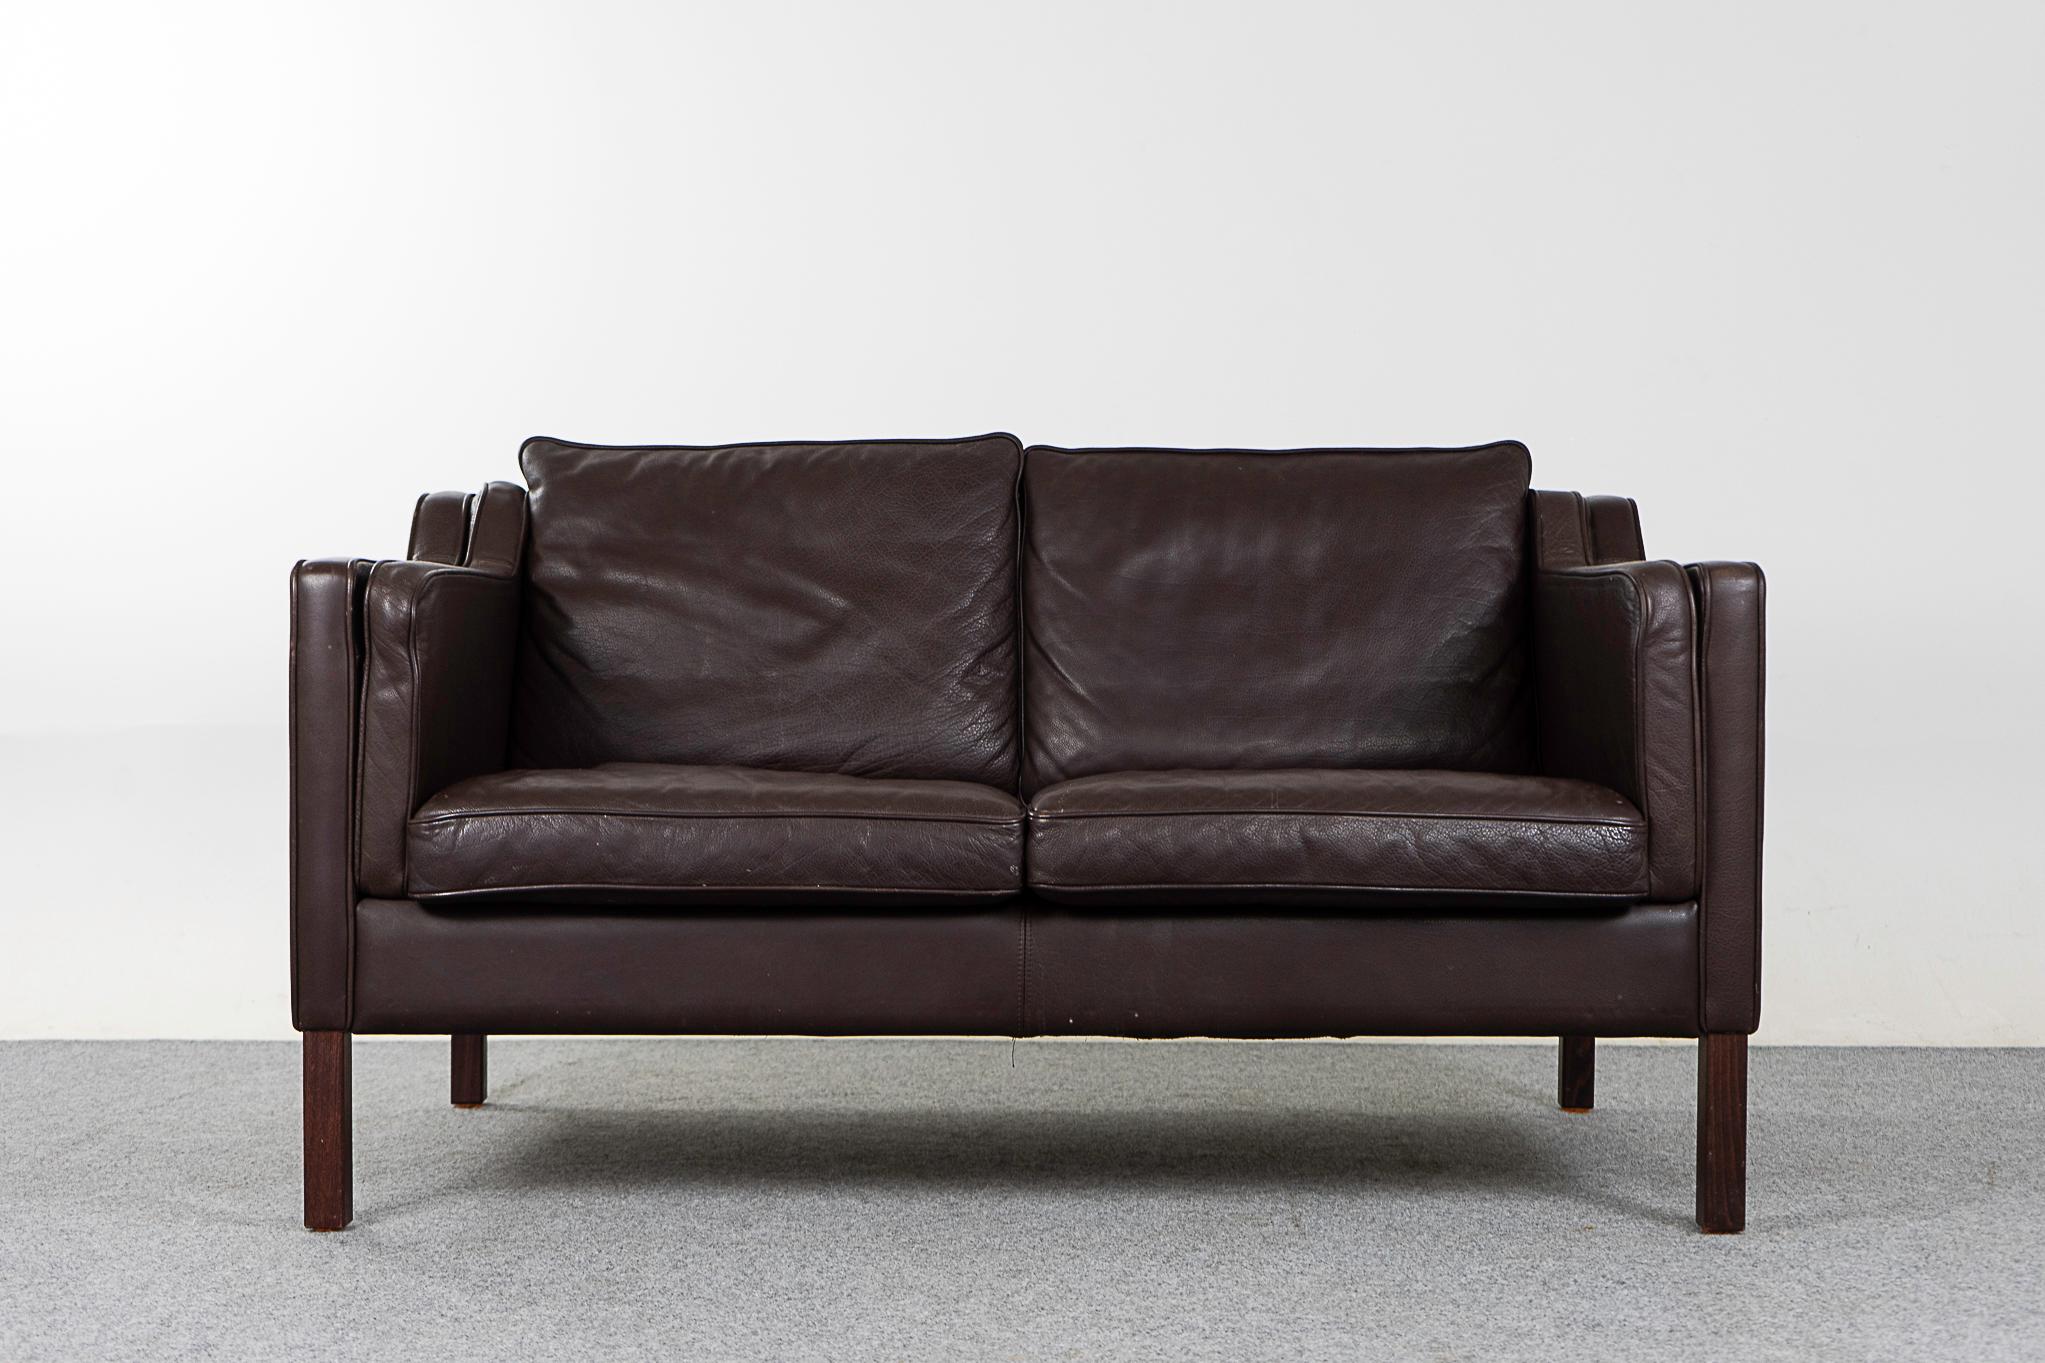 Leather mid-century loveseat by Stouby, circa 1960's. Original dark brown leather is soft and supple while also being durable to ensure years of use and enjoyment. Compact footprint make this the perfect seating solution for urban dwellers in cozy